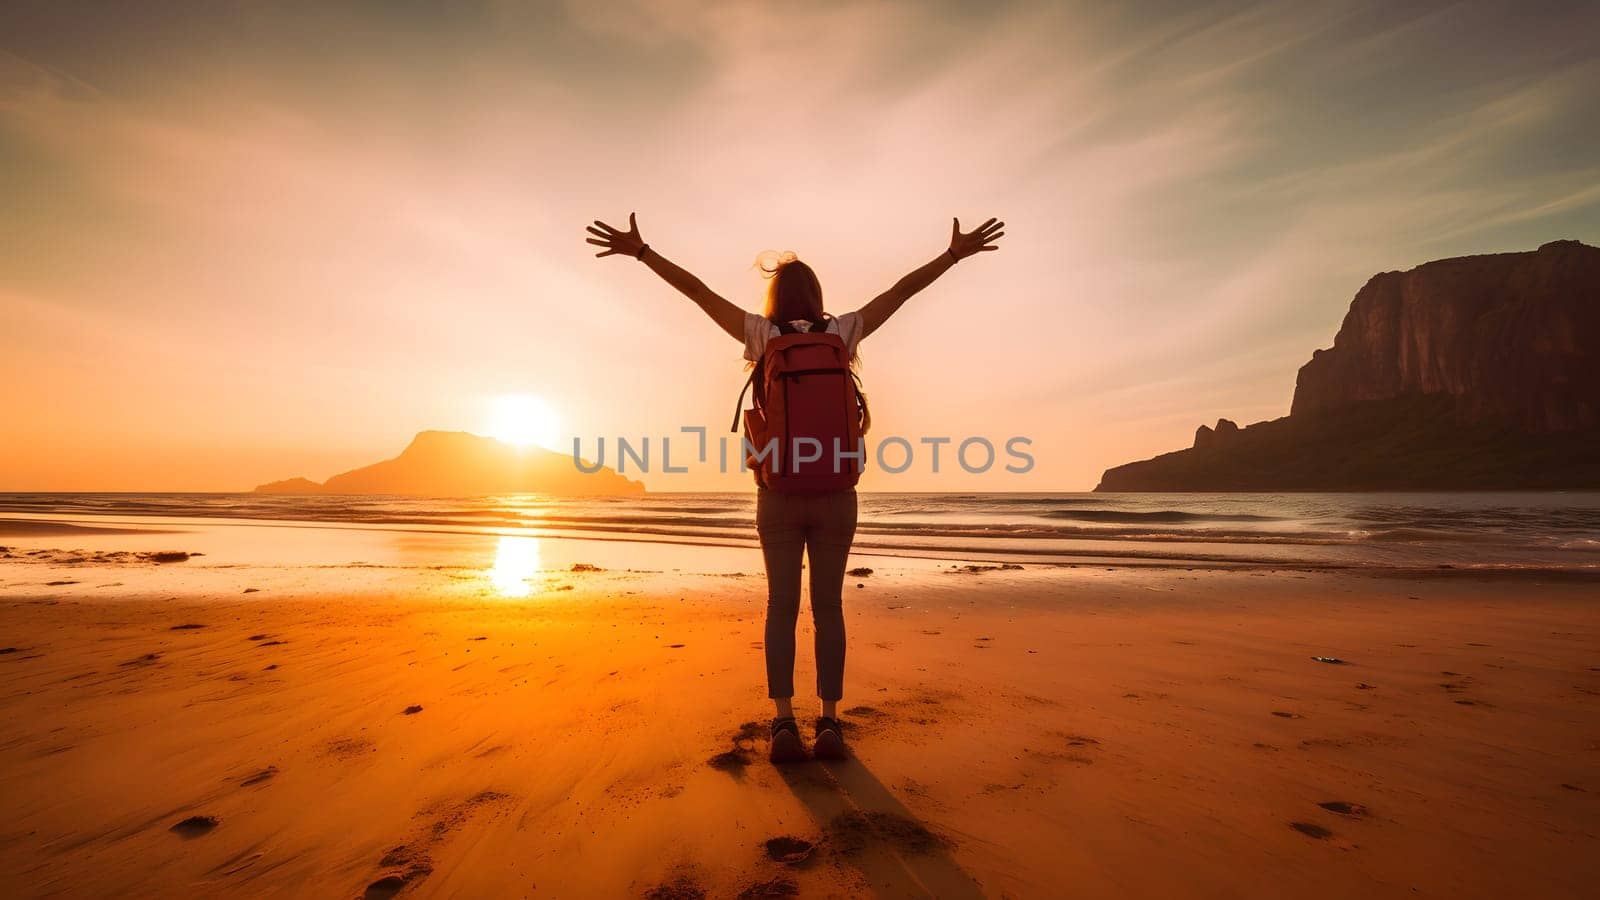 Happy traveler enjoying freedom at susnet beach - Cheerful hiker with backpack raising hands up at sunset. Neural network generated in May 2023. Not based on any actual person, scene or pattern.